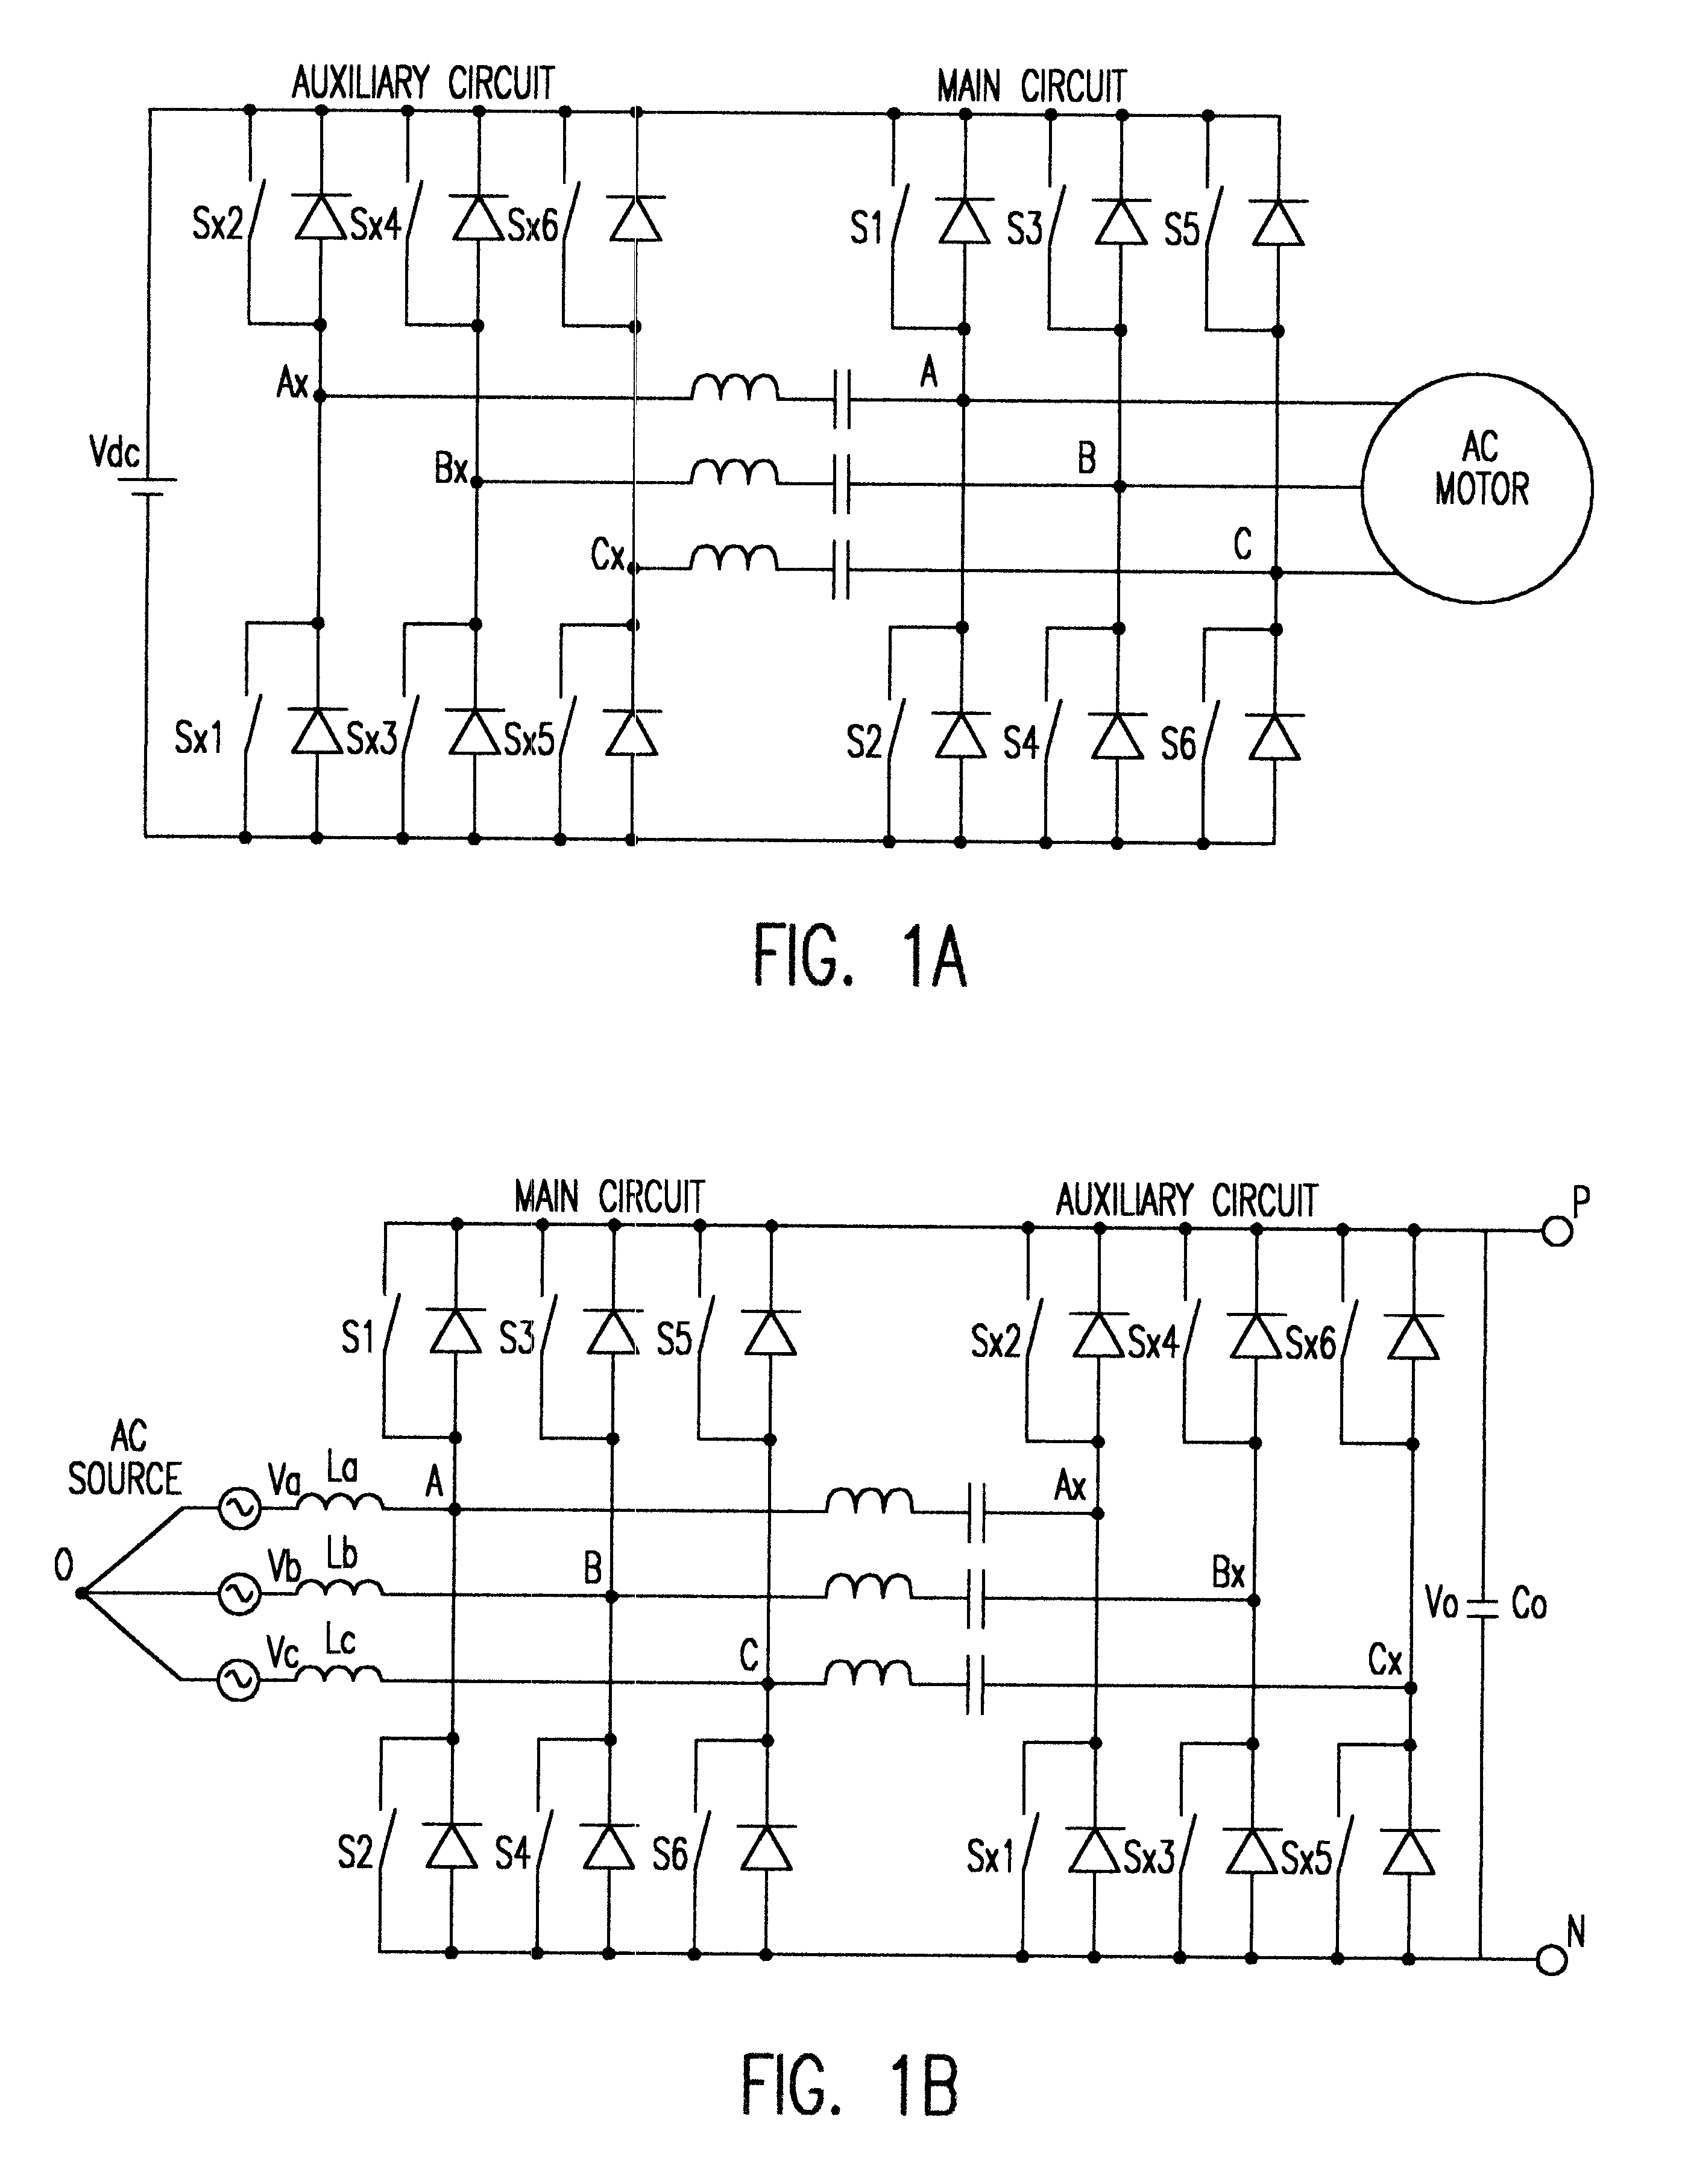 Three-phase zero-current-transition (ZCT) inverters and rectifiers with three auxiliary switches